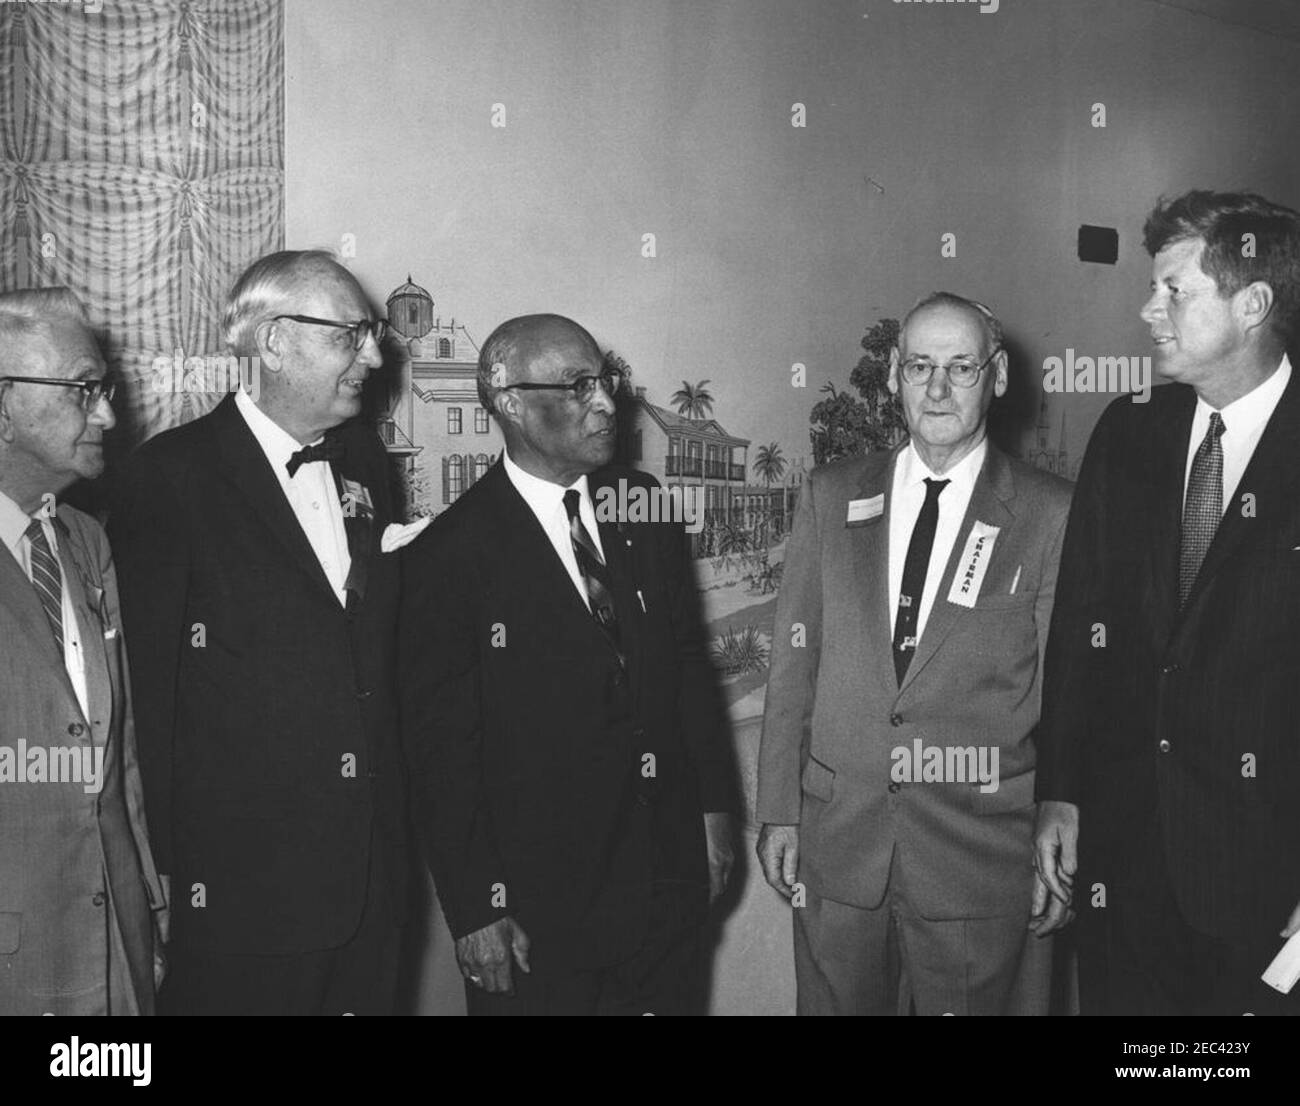 Address to the National Convention of the National Council of Senior Citizens, 11:47AM. President John F. Kennedy visits with attendees of the National Convention of the National Council of Senior Citizens at the Willard Hotel, Washington D.C. (L-R): unidentified; Council Vice President, Burt Garnett; Director of Special Projects for the Council, Lawrence A. Oxley; Council Chairman, John Fitzpatrick; President Kennedy. Stock Photo